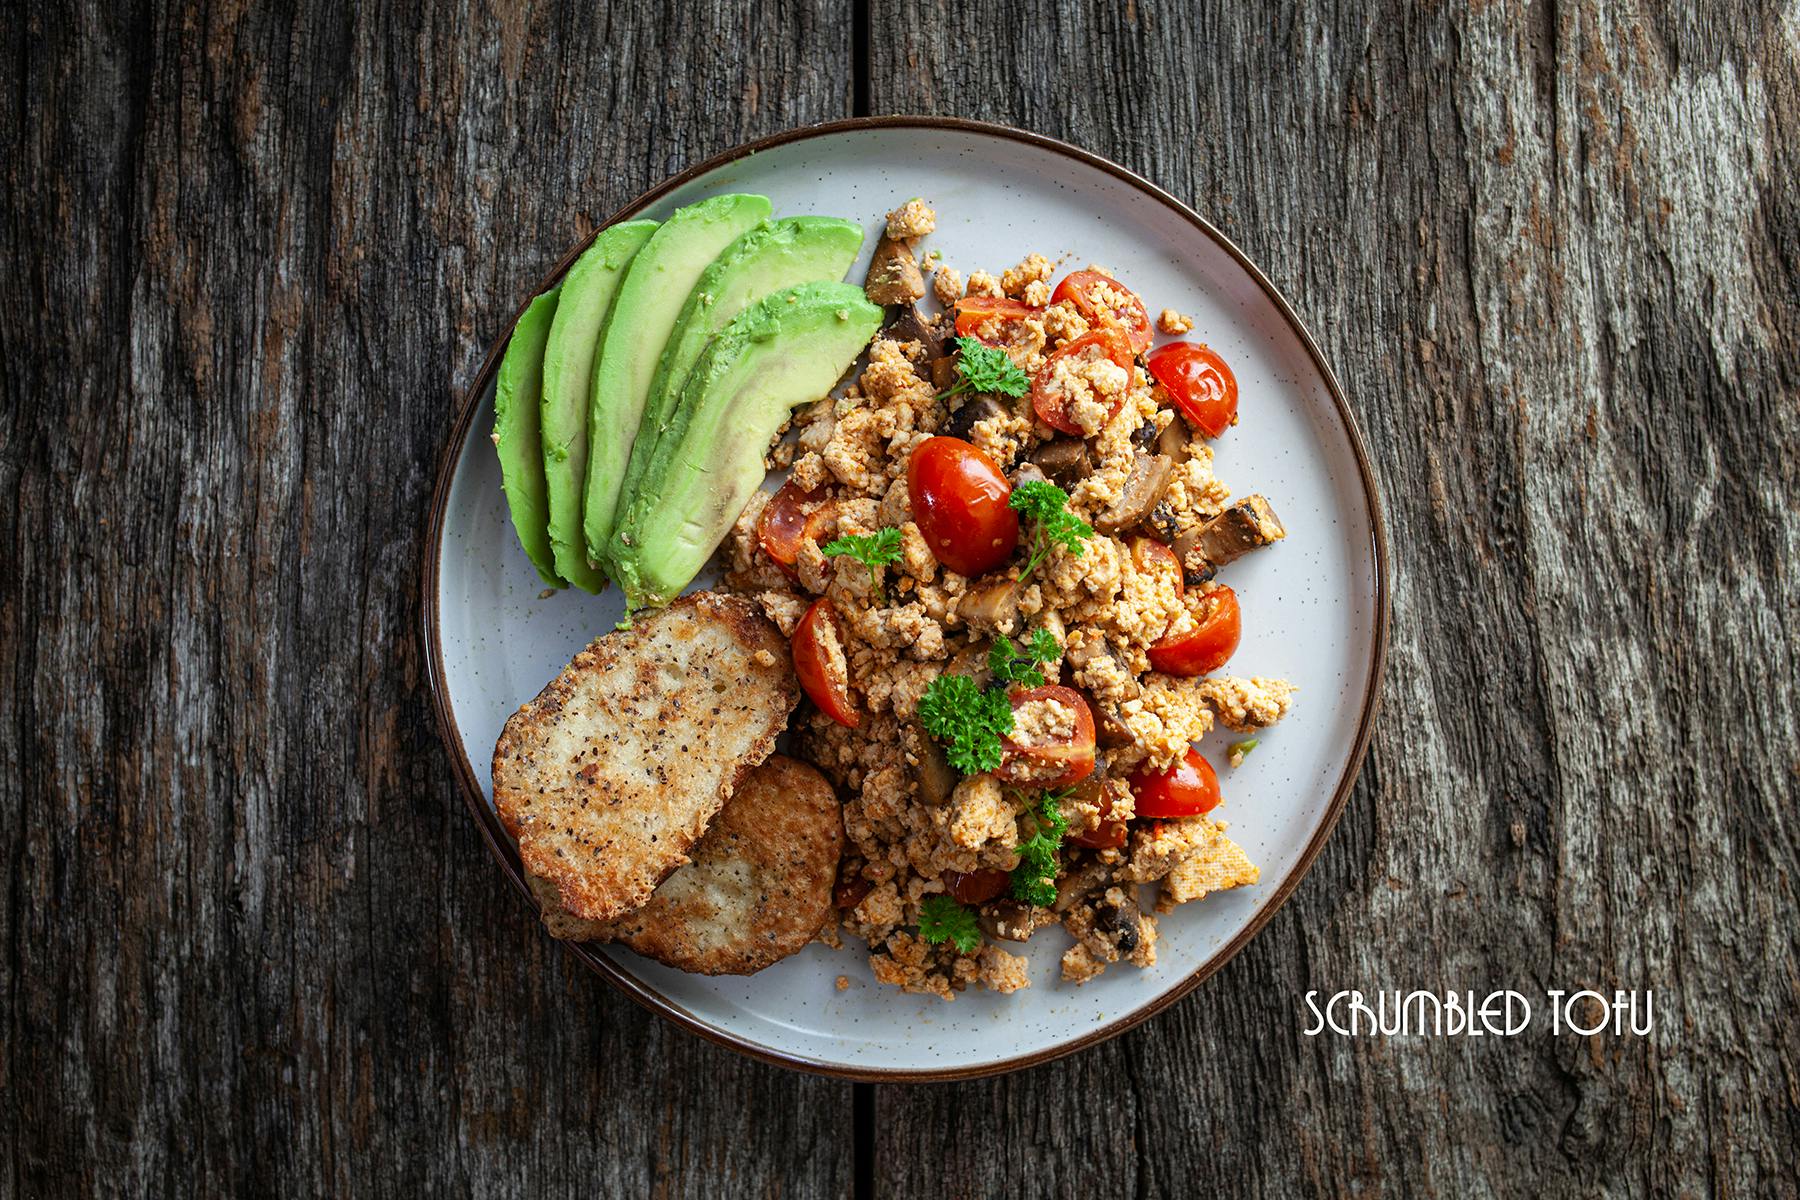 scrumbled tofu with mushrooms, tomato, avocado and fried toast